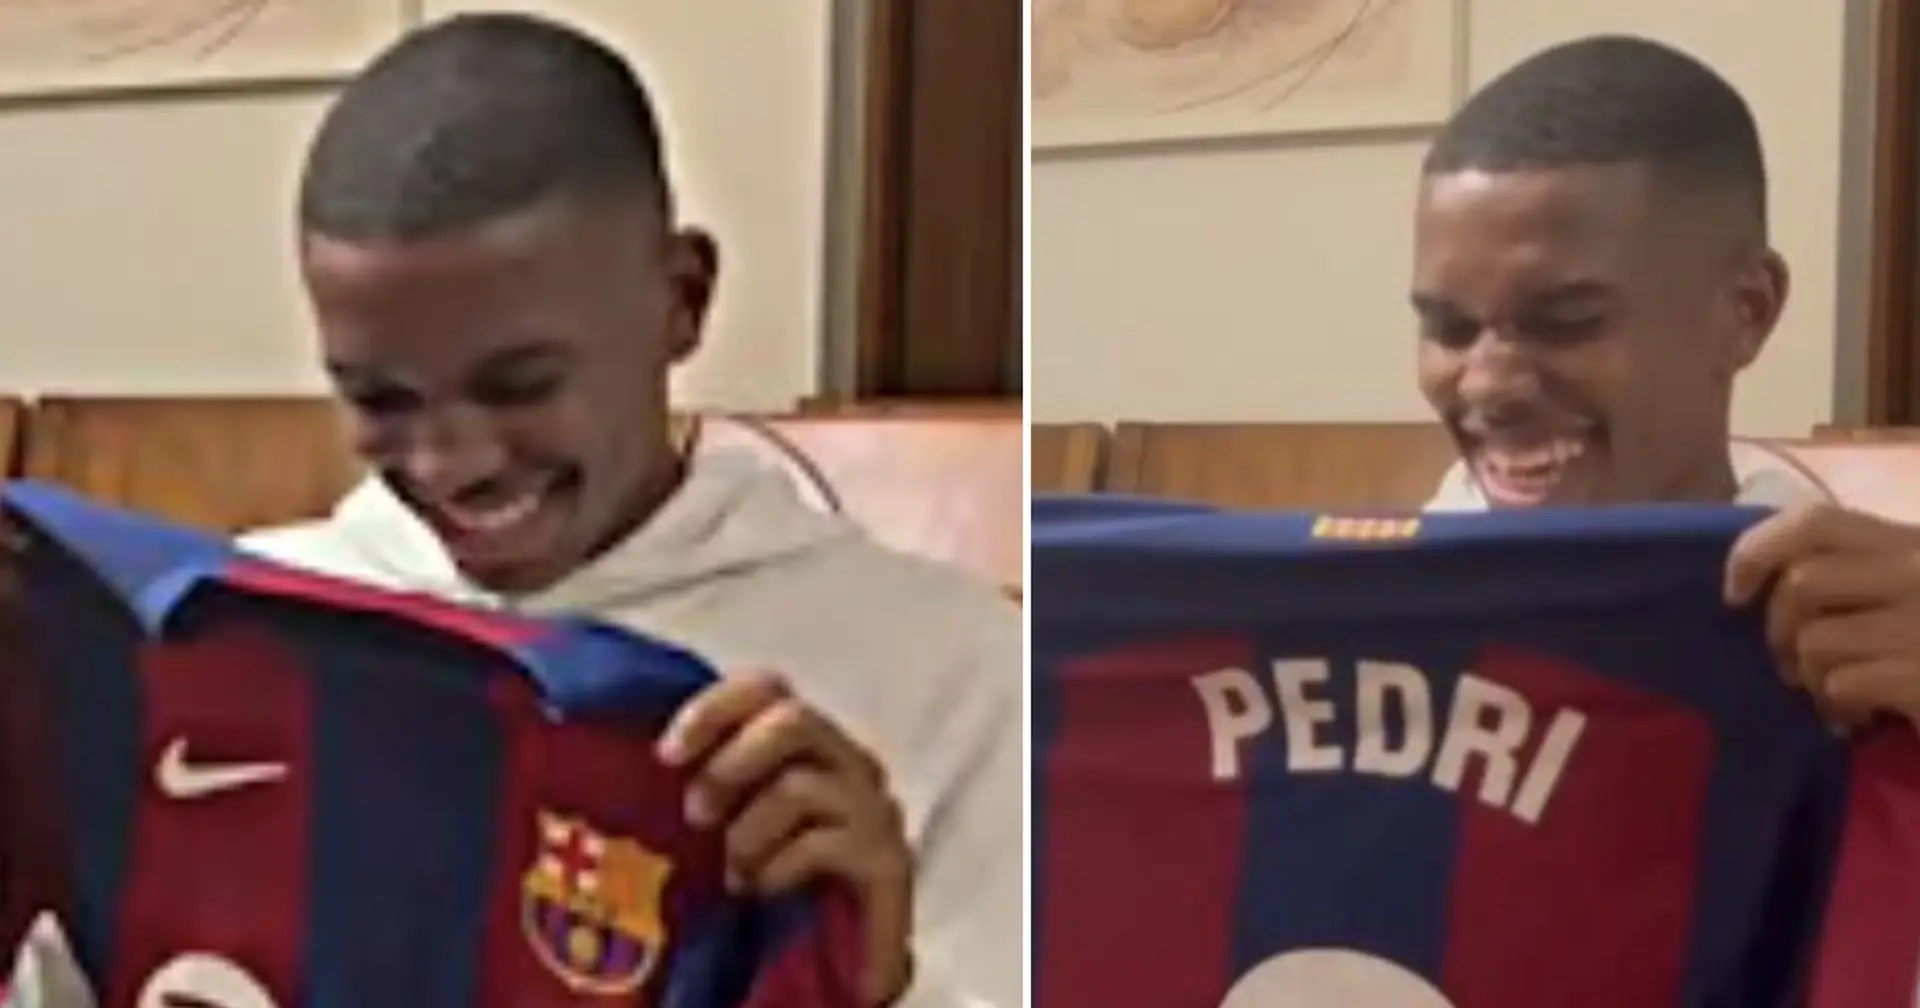 16-year-old Palmeiras talent gifted Barca jersey, his priceless reaction caught on camera